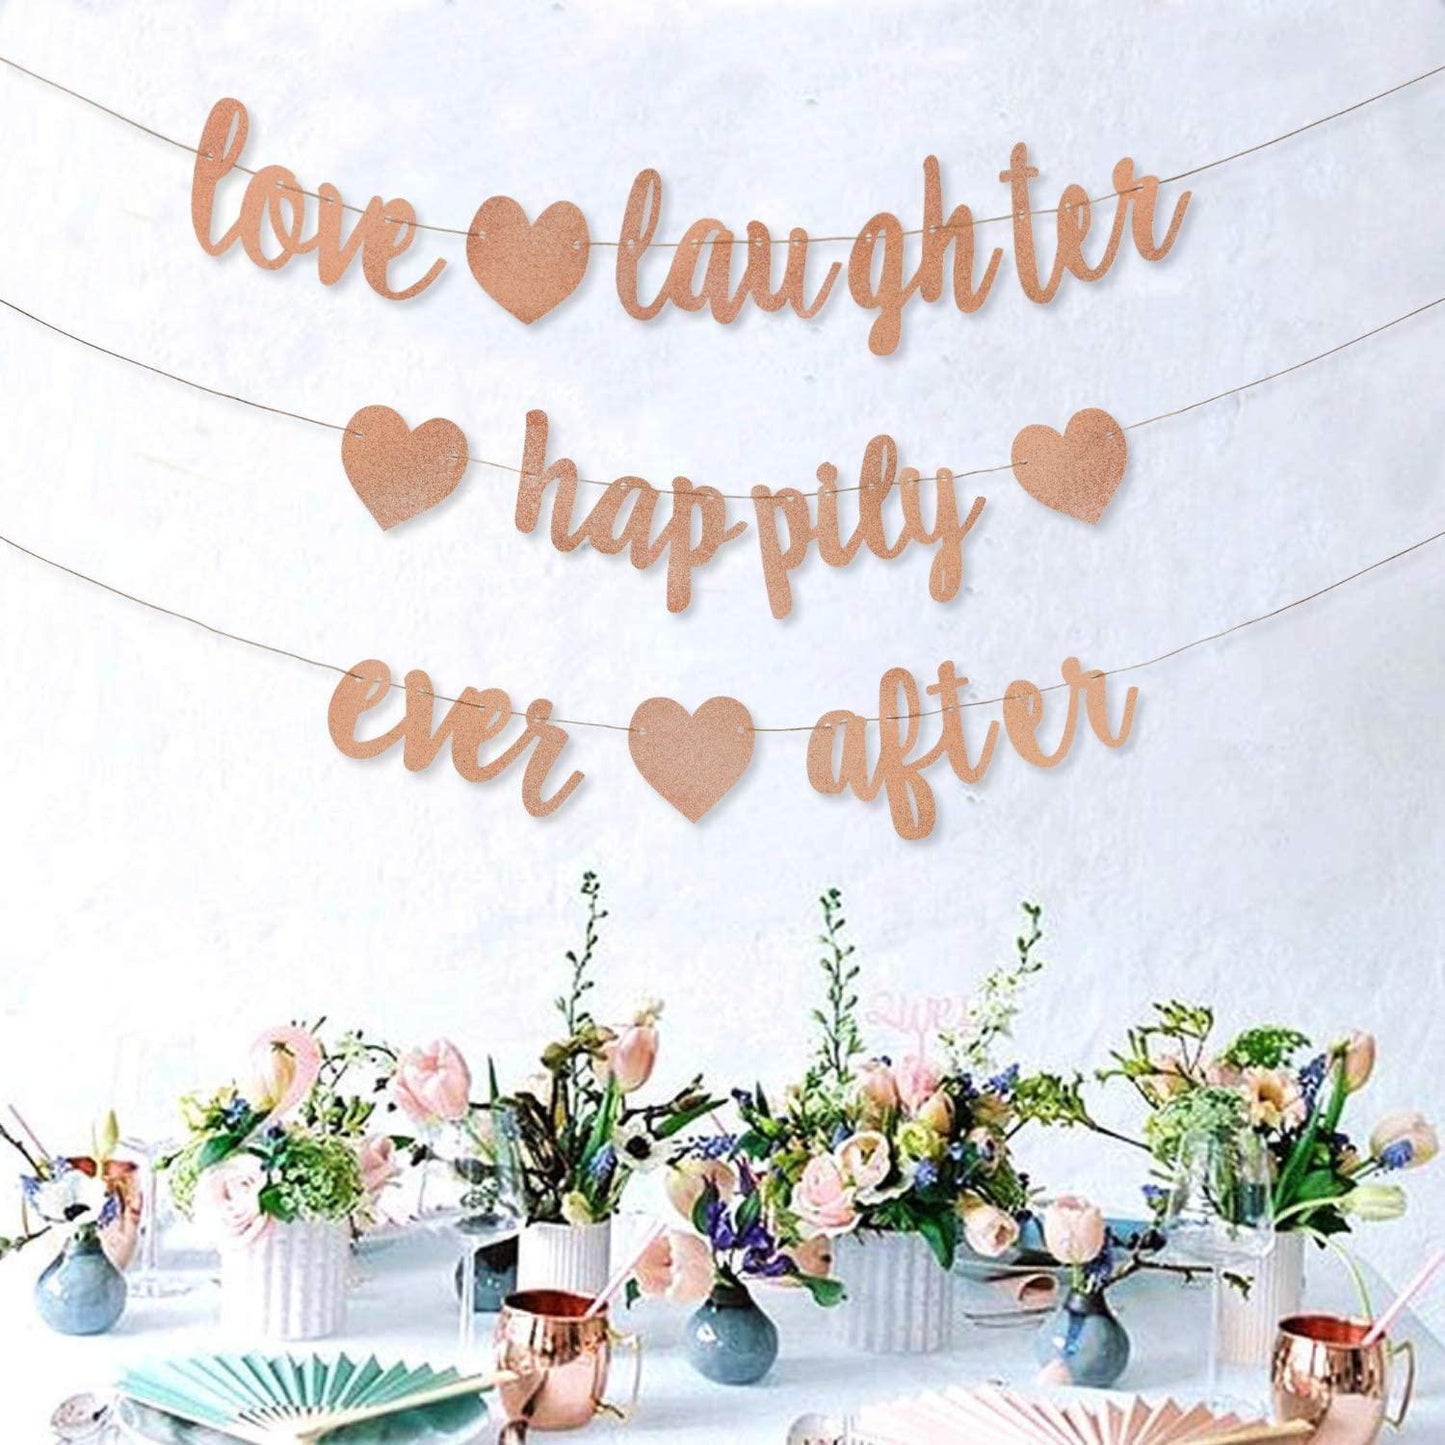 3Pcs Rose Gold Glitter Love Laughter and Happily Ever After Banner - Wedding Shower Decorations - If you say i do